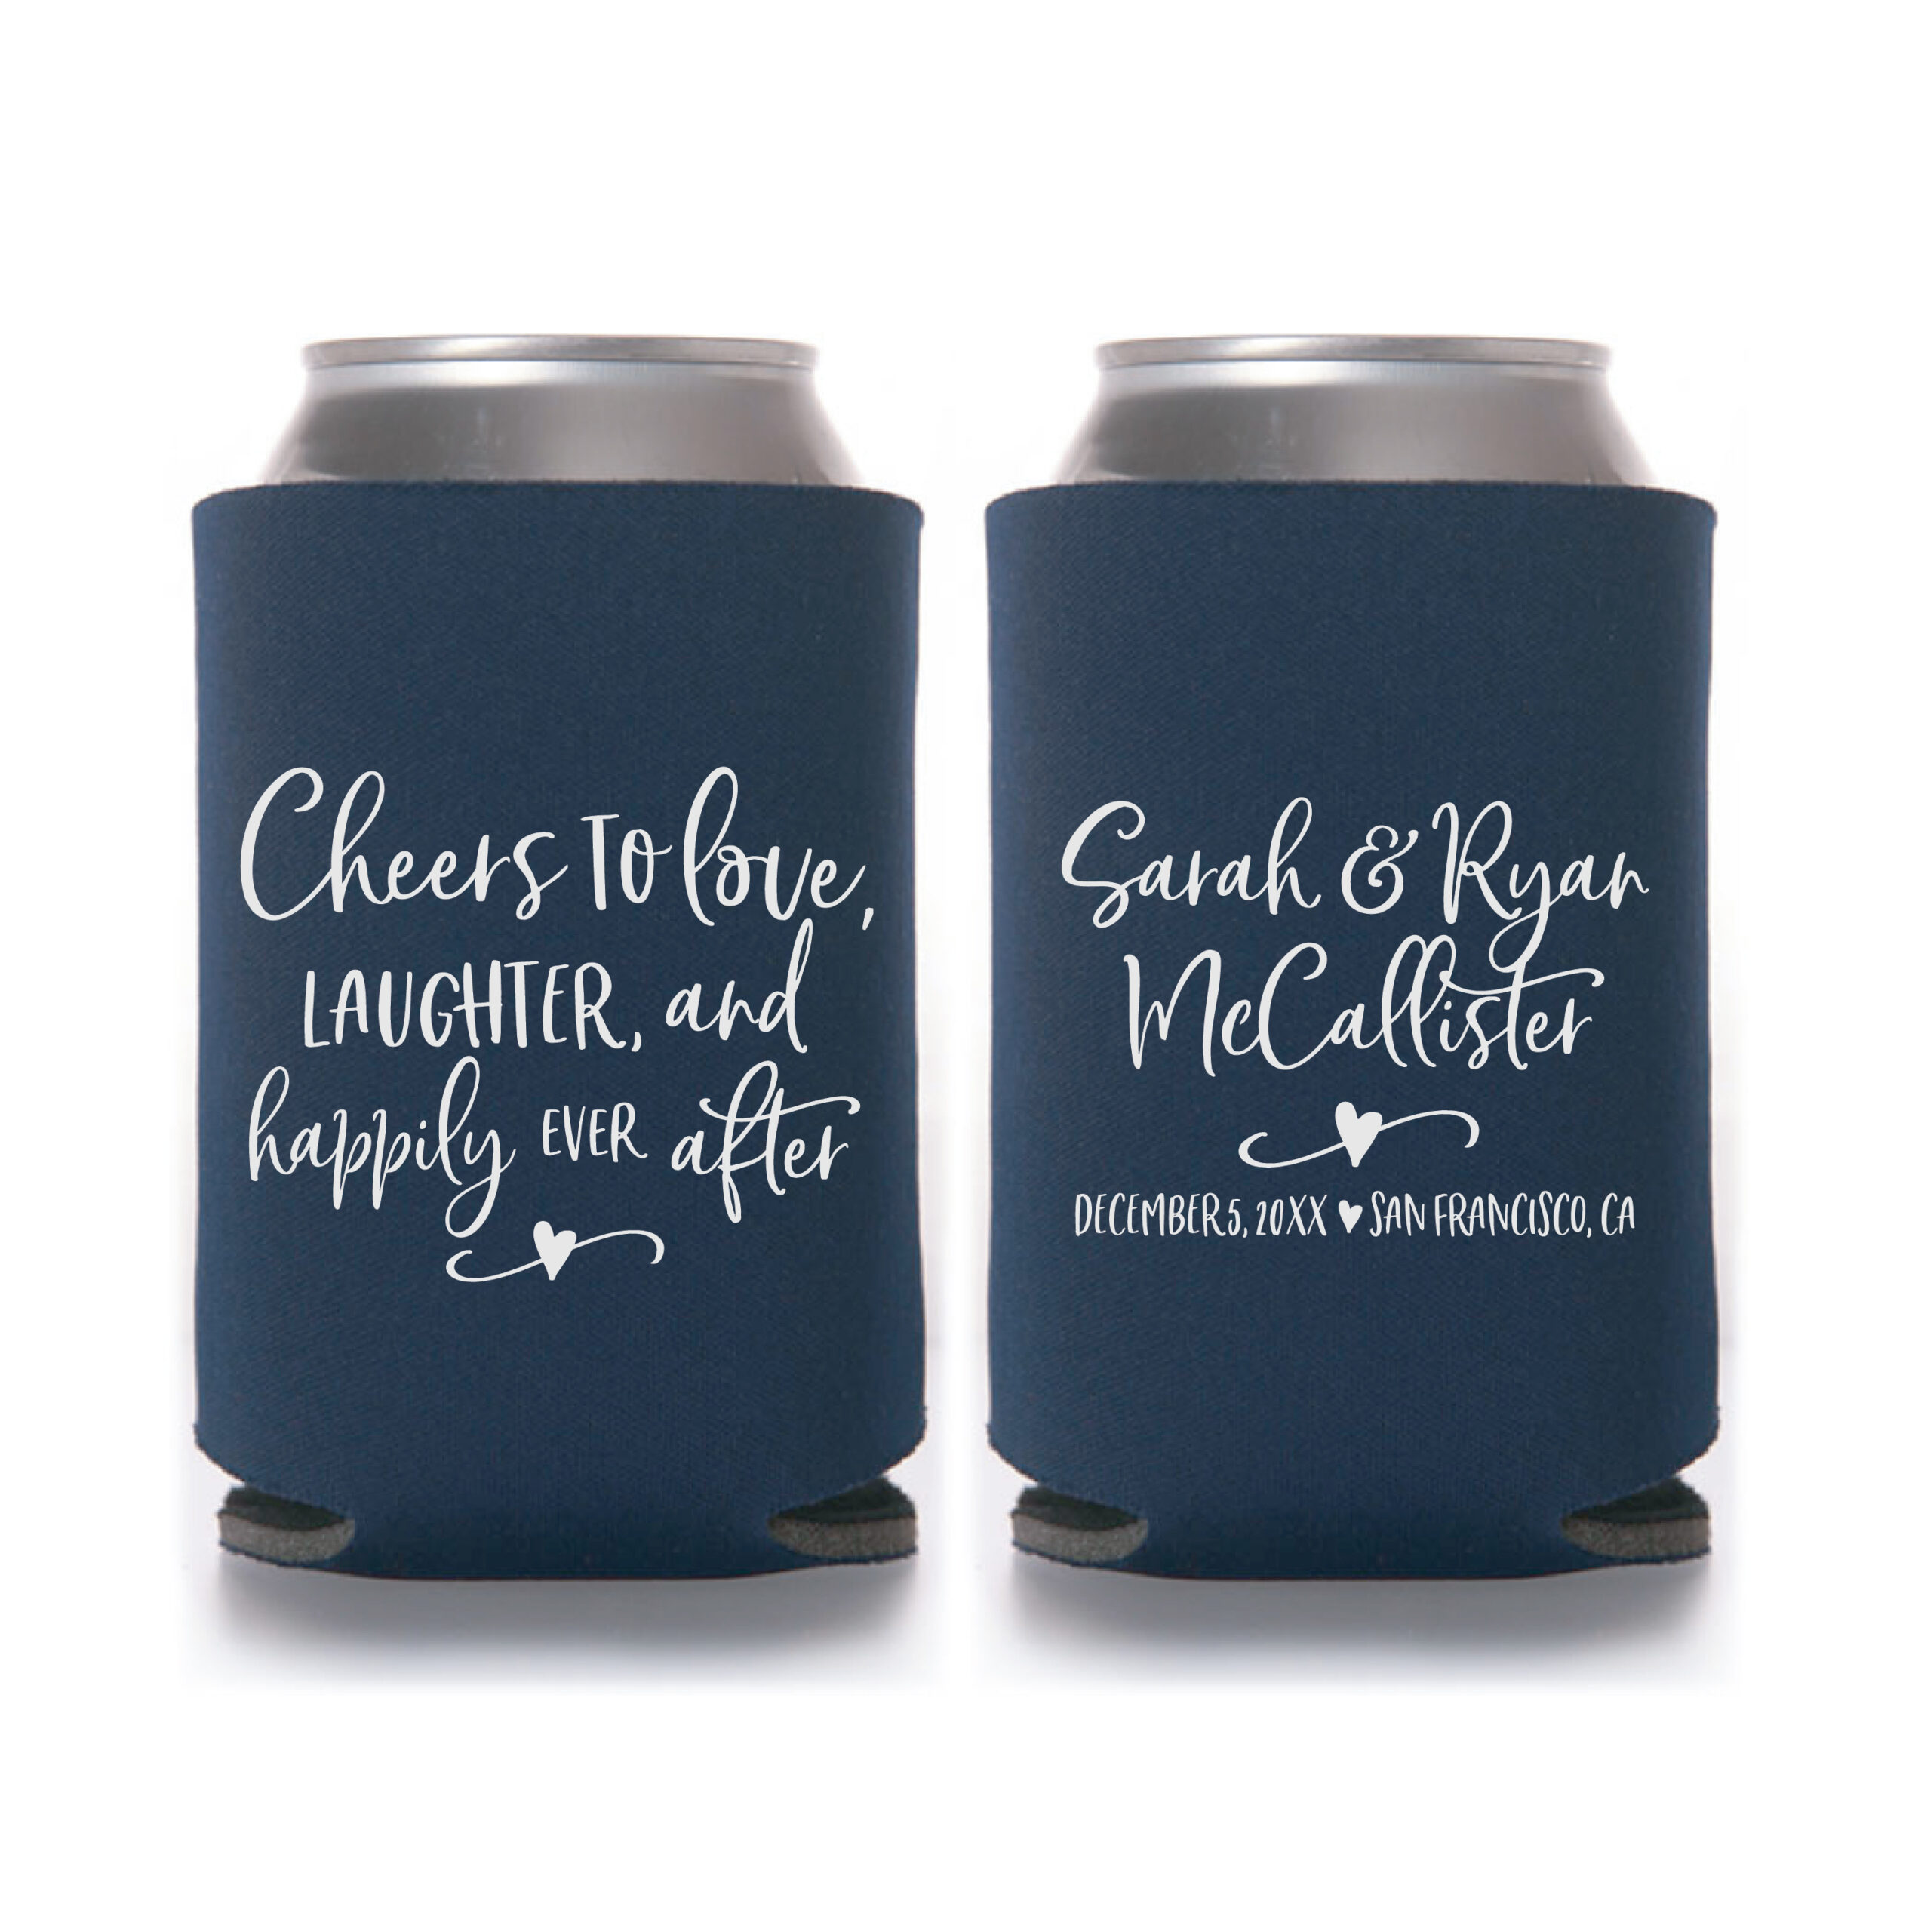 Cheers to Love, Laughter & Happily Ever After Personalzed Wedding Koozie in Handwritten Fonts, Typography - Style #T99